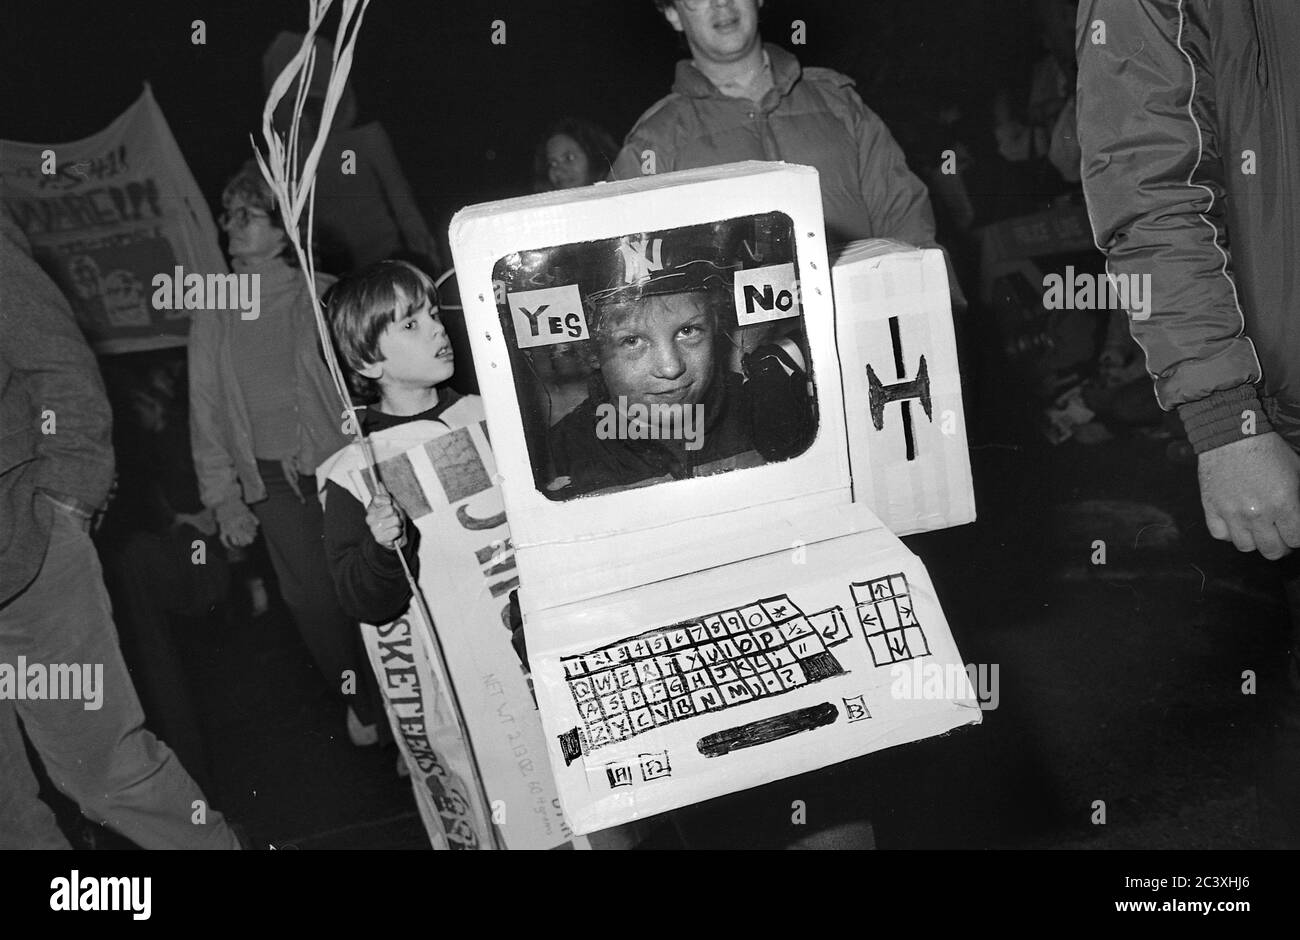 Boy in computer costume at the Greenwich Village Halloween Parade, New York City, USA in the 1980's  Photographed with Black & White film at night. Stock Photo